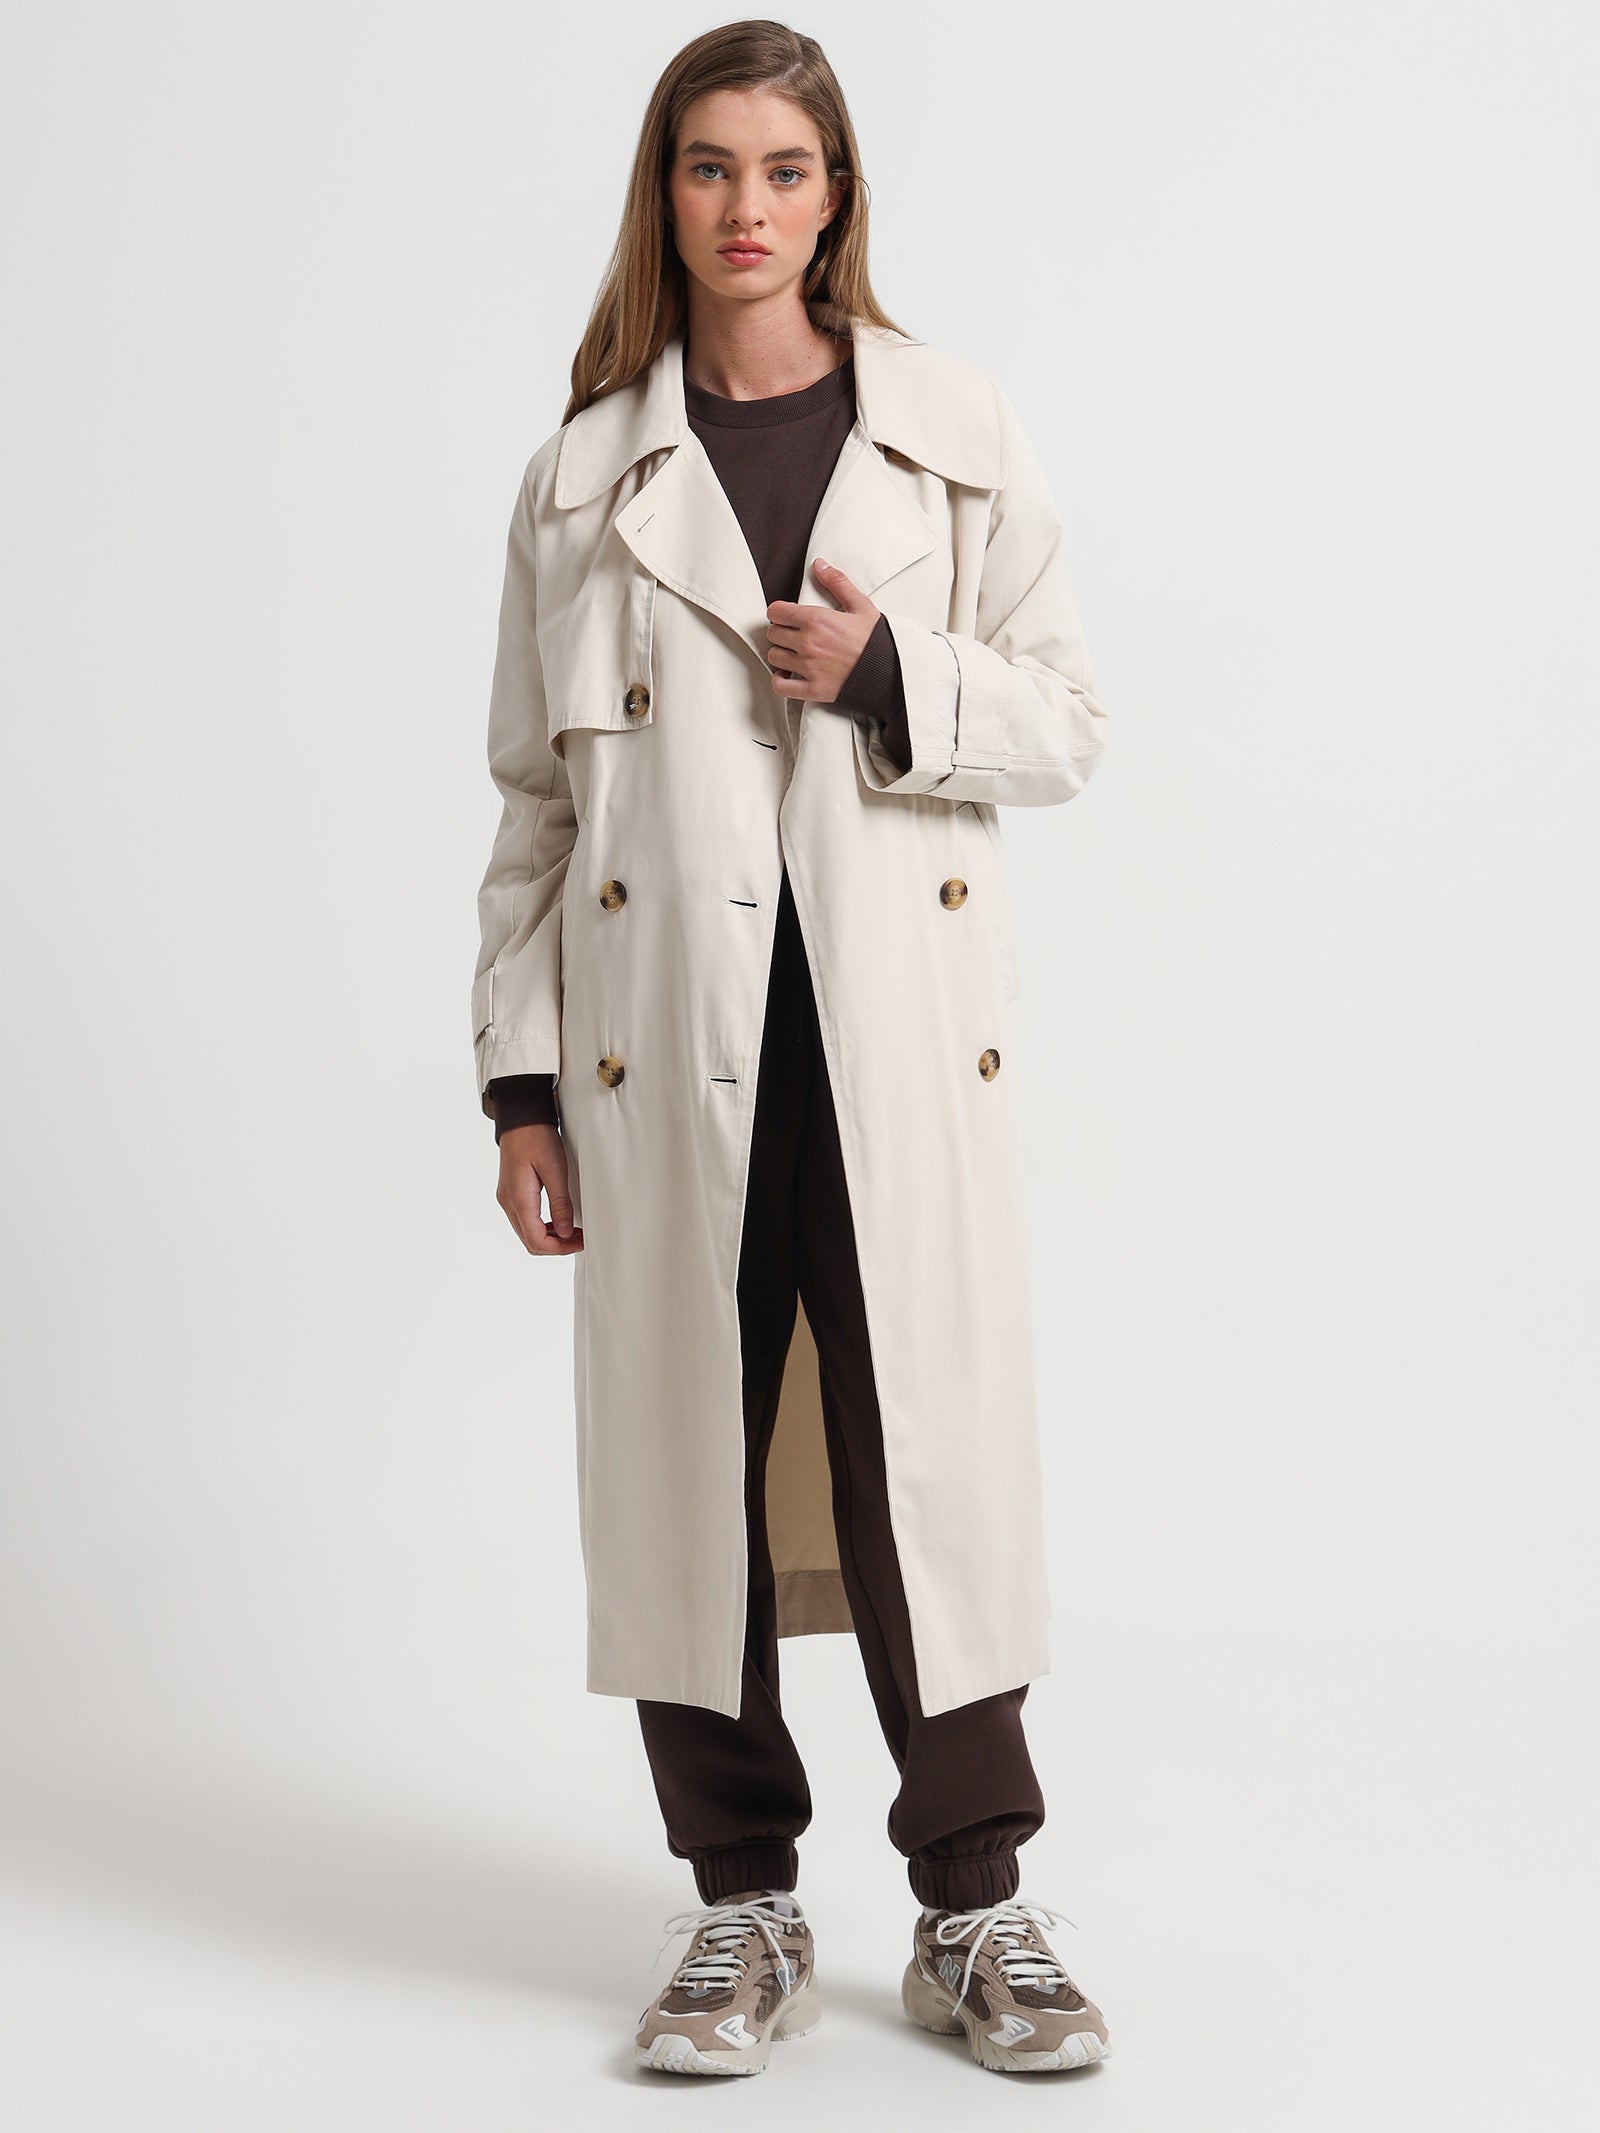 Odyssey Trench Coat in Cloud White - Glue Store